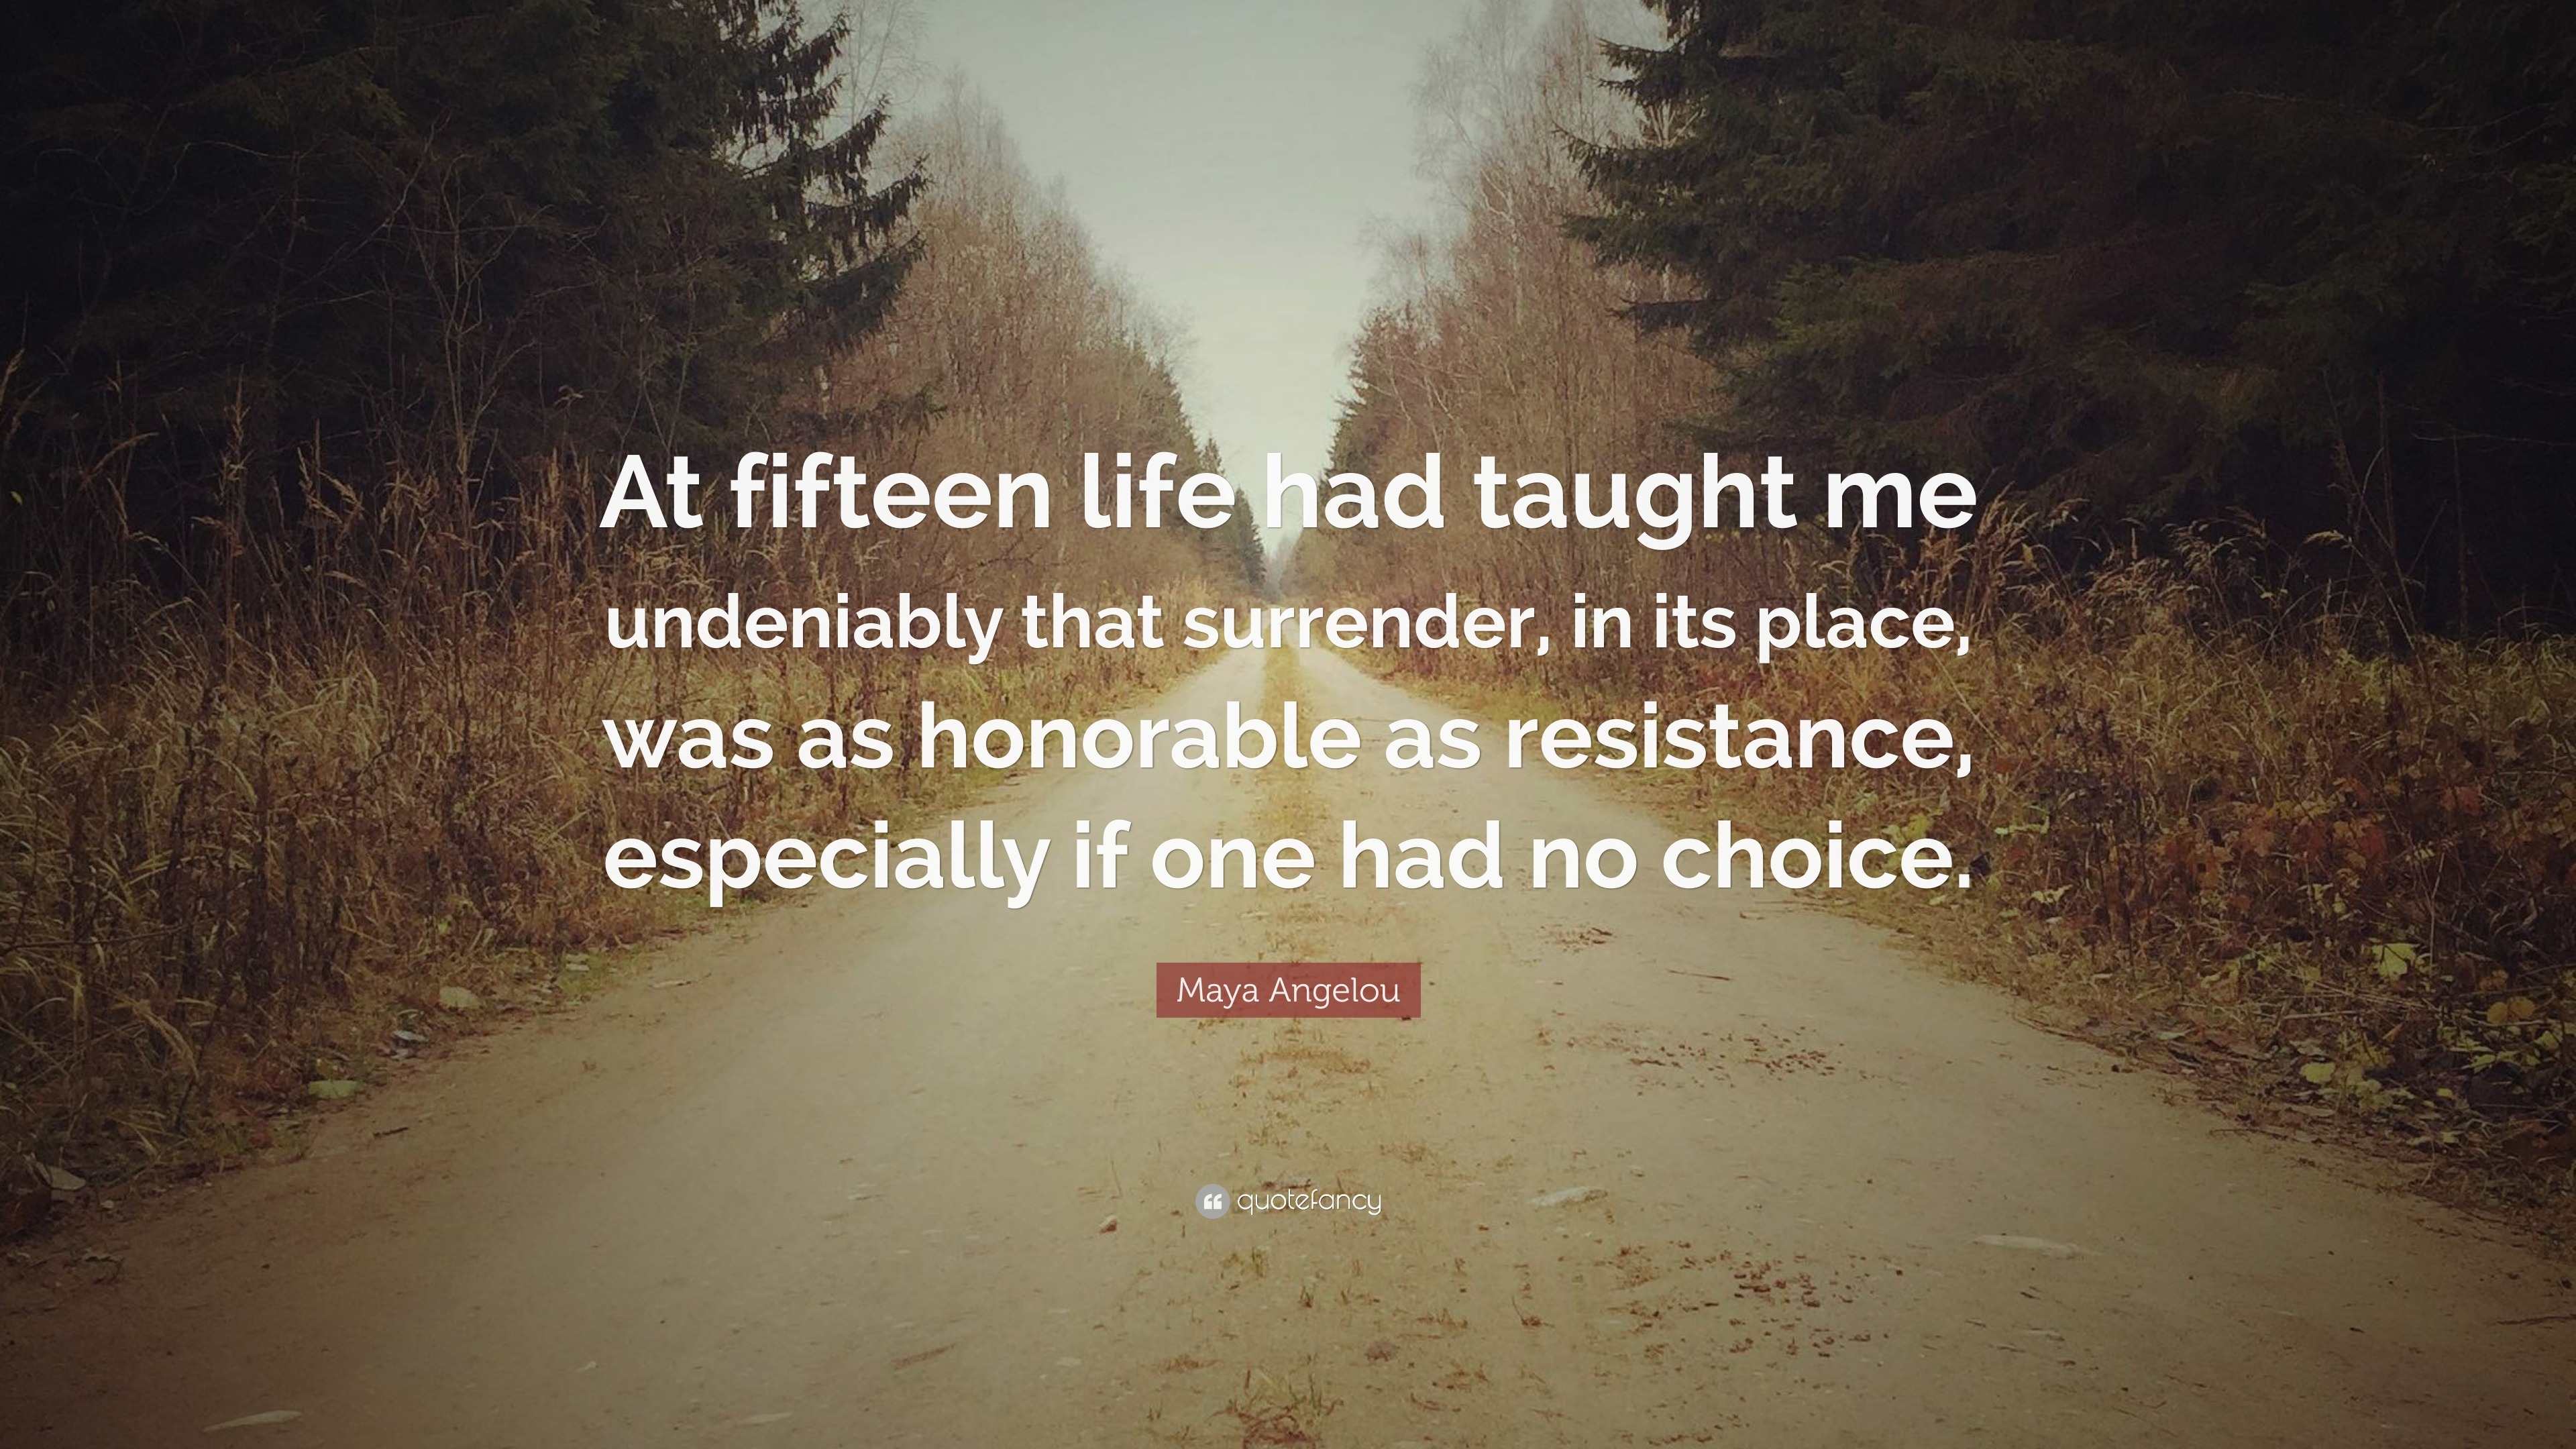 Maya Angelou Quote: “At fifteen life had taught me undeniably that ...